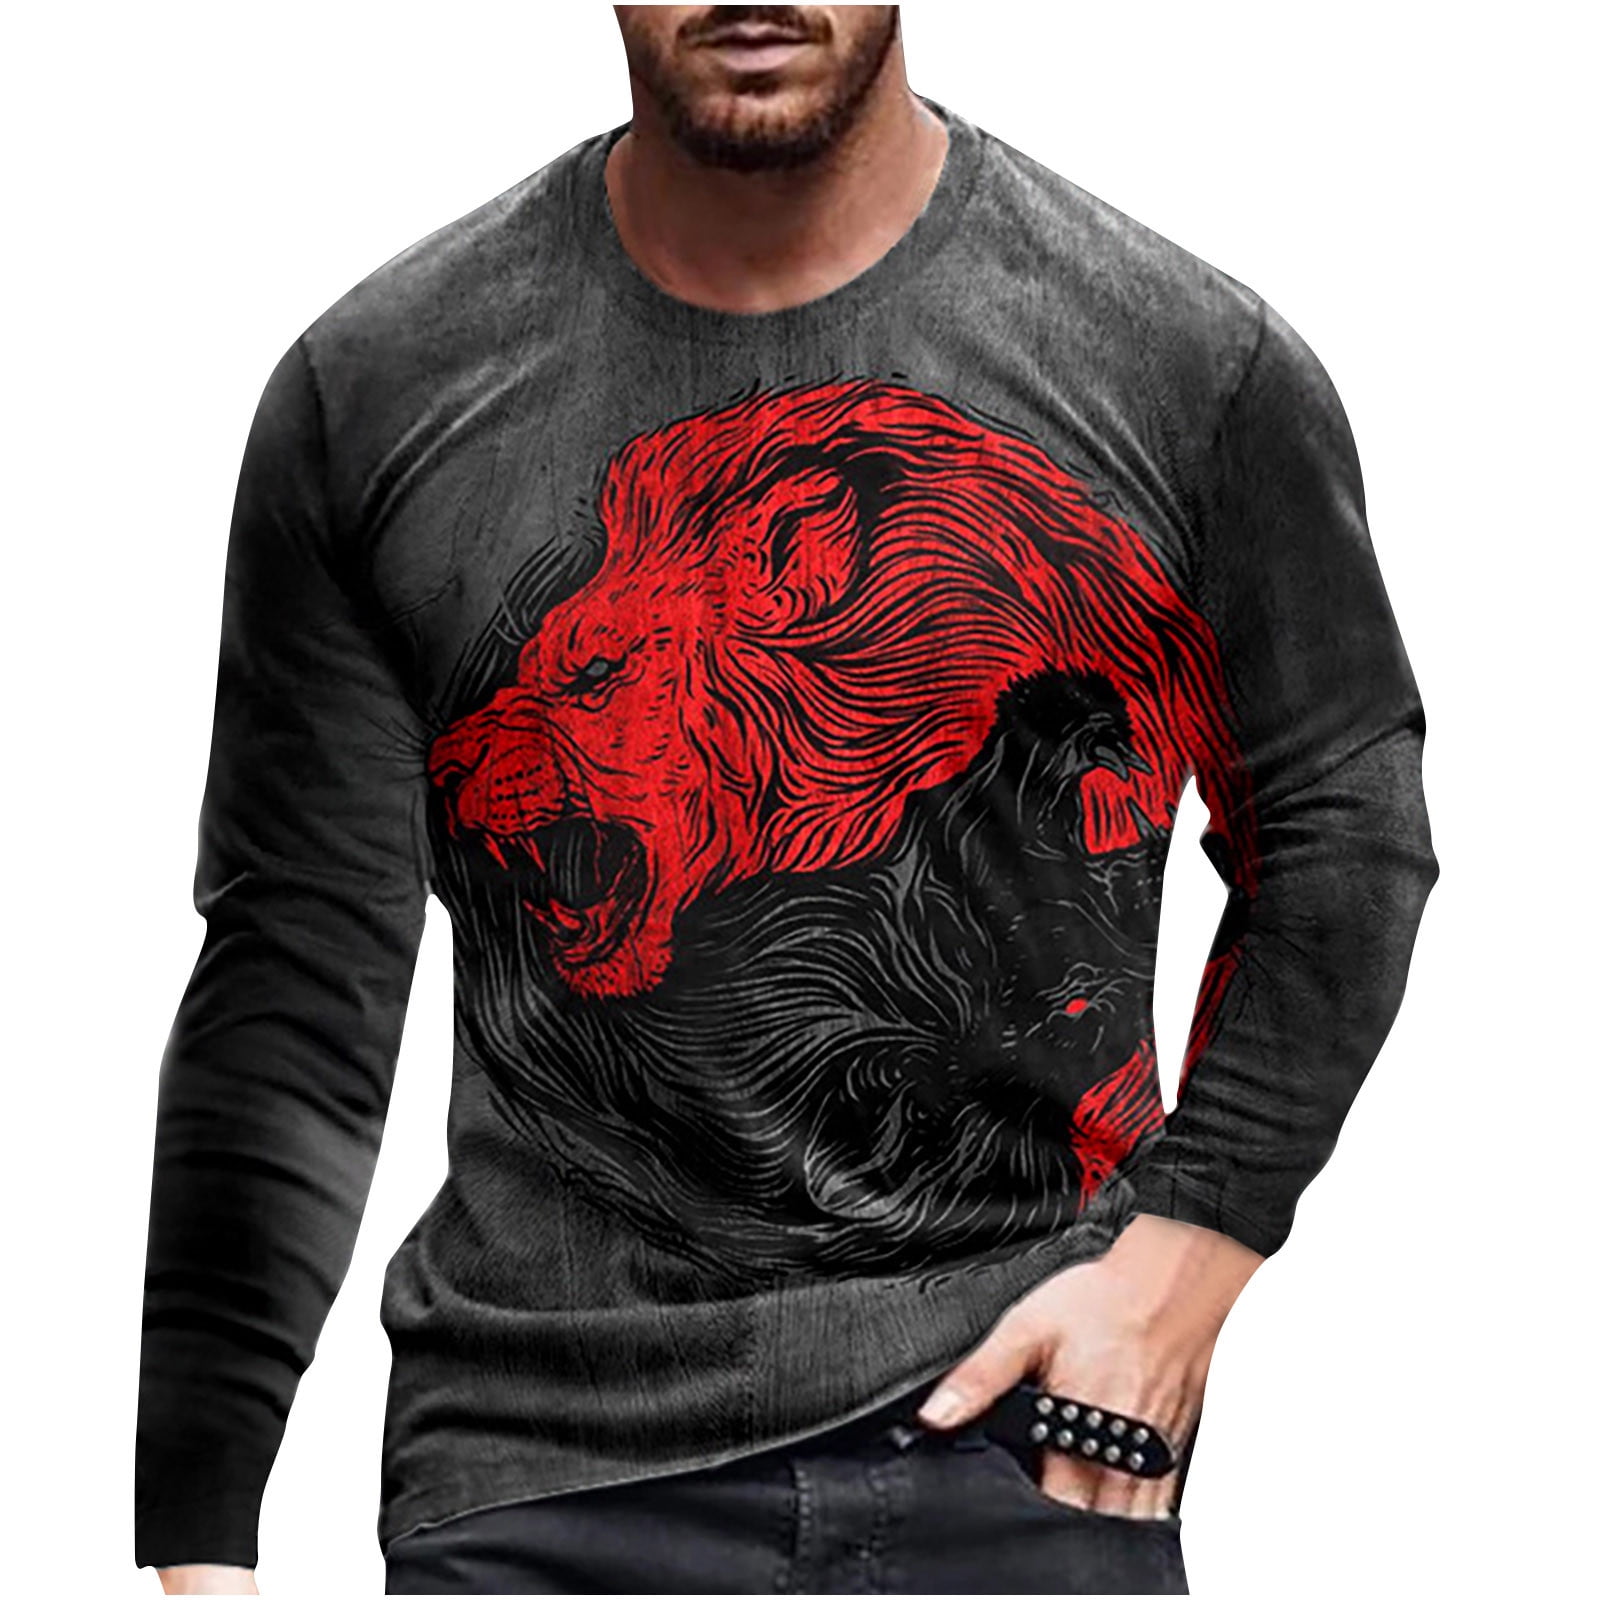 jsaierl Mens T Shirts Round Neck Casual Long Sleeve for Men Animal 3D  Printed Pattern Tops for Men Graphic Tee Shirt 